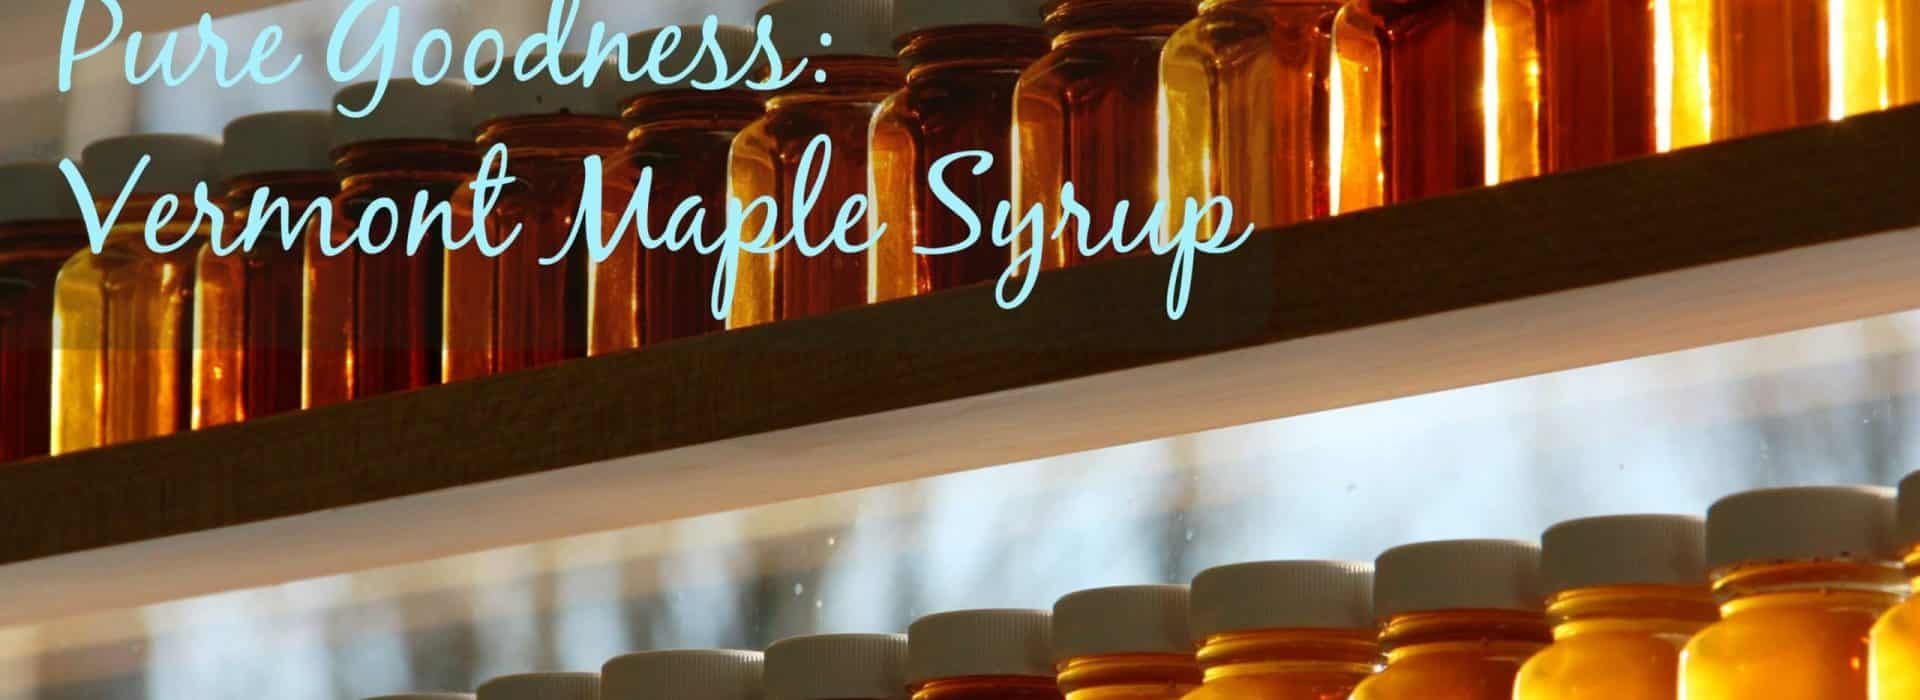 Dessert recipes featuring Vermont Maple syrup|Vermont maple open house weekend|Young couple standing in a maple sugar house with steam from the syrup boiler billowing behind them.